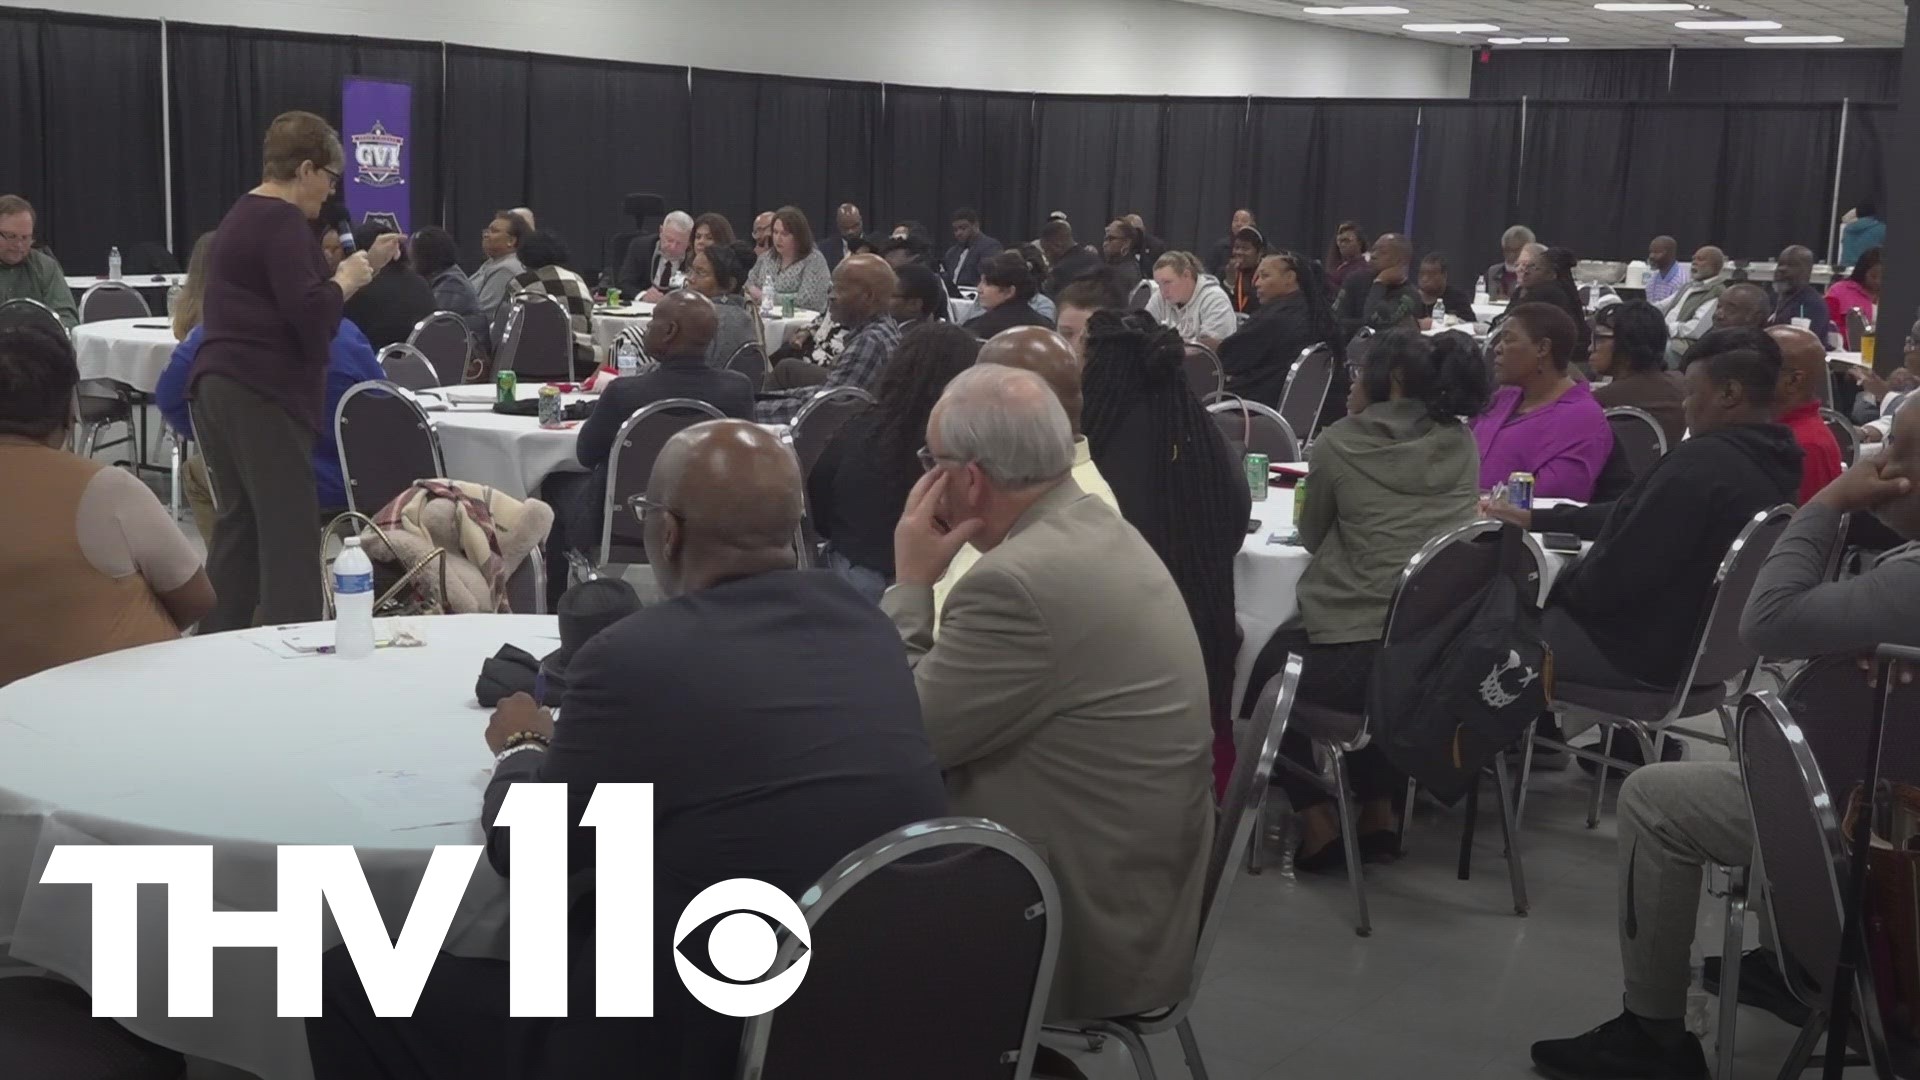 One of the biggest issues for Pine Bluff is being put in the spotlight. Now, one organization is sharing how they plan to reduce gun violence in the city.